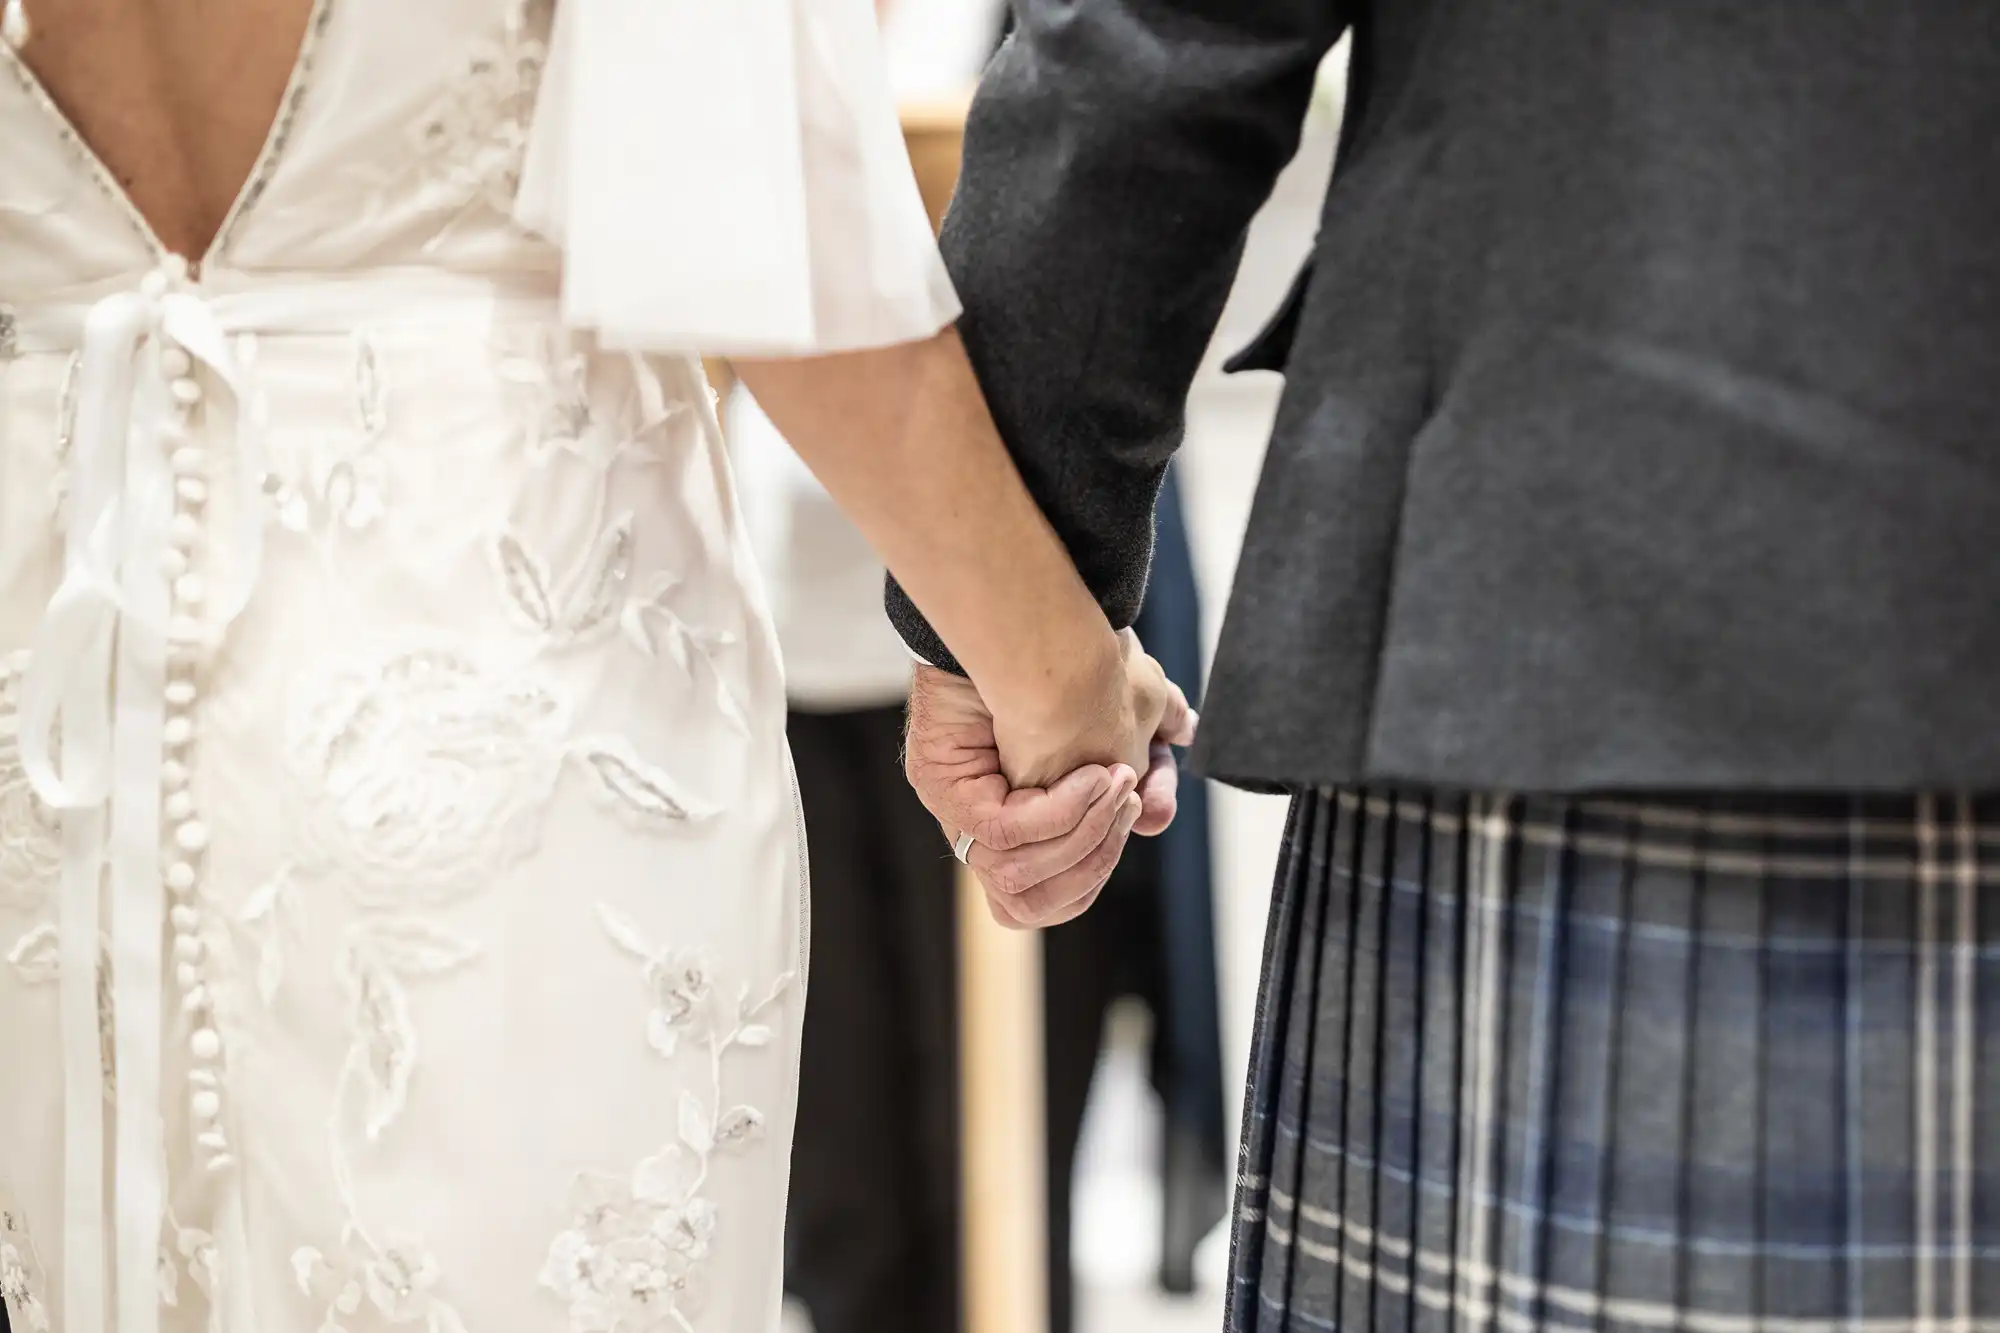 A couple holds hands, wearing a white wedding dress with floral embroidery and a dark suit with a plaid kilt, standing side by side.